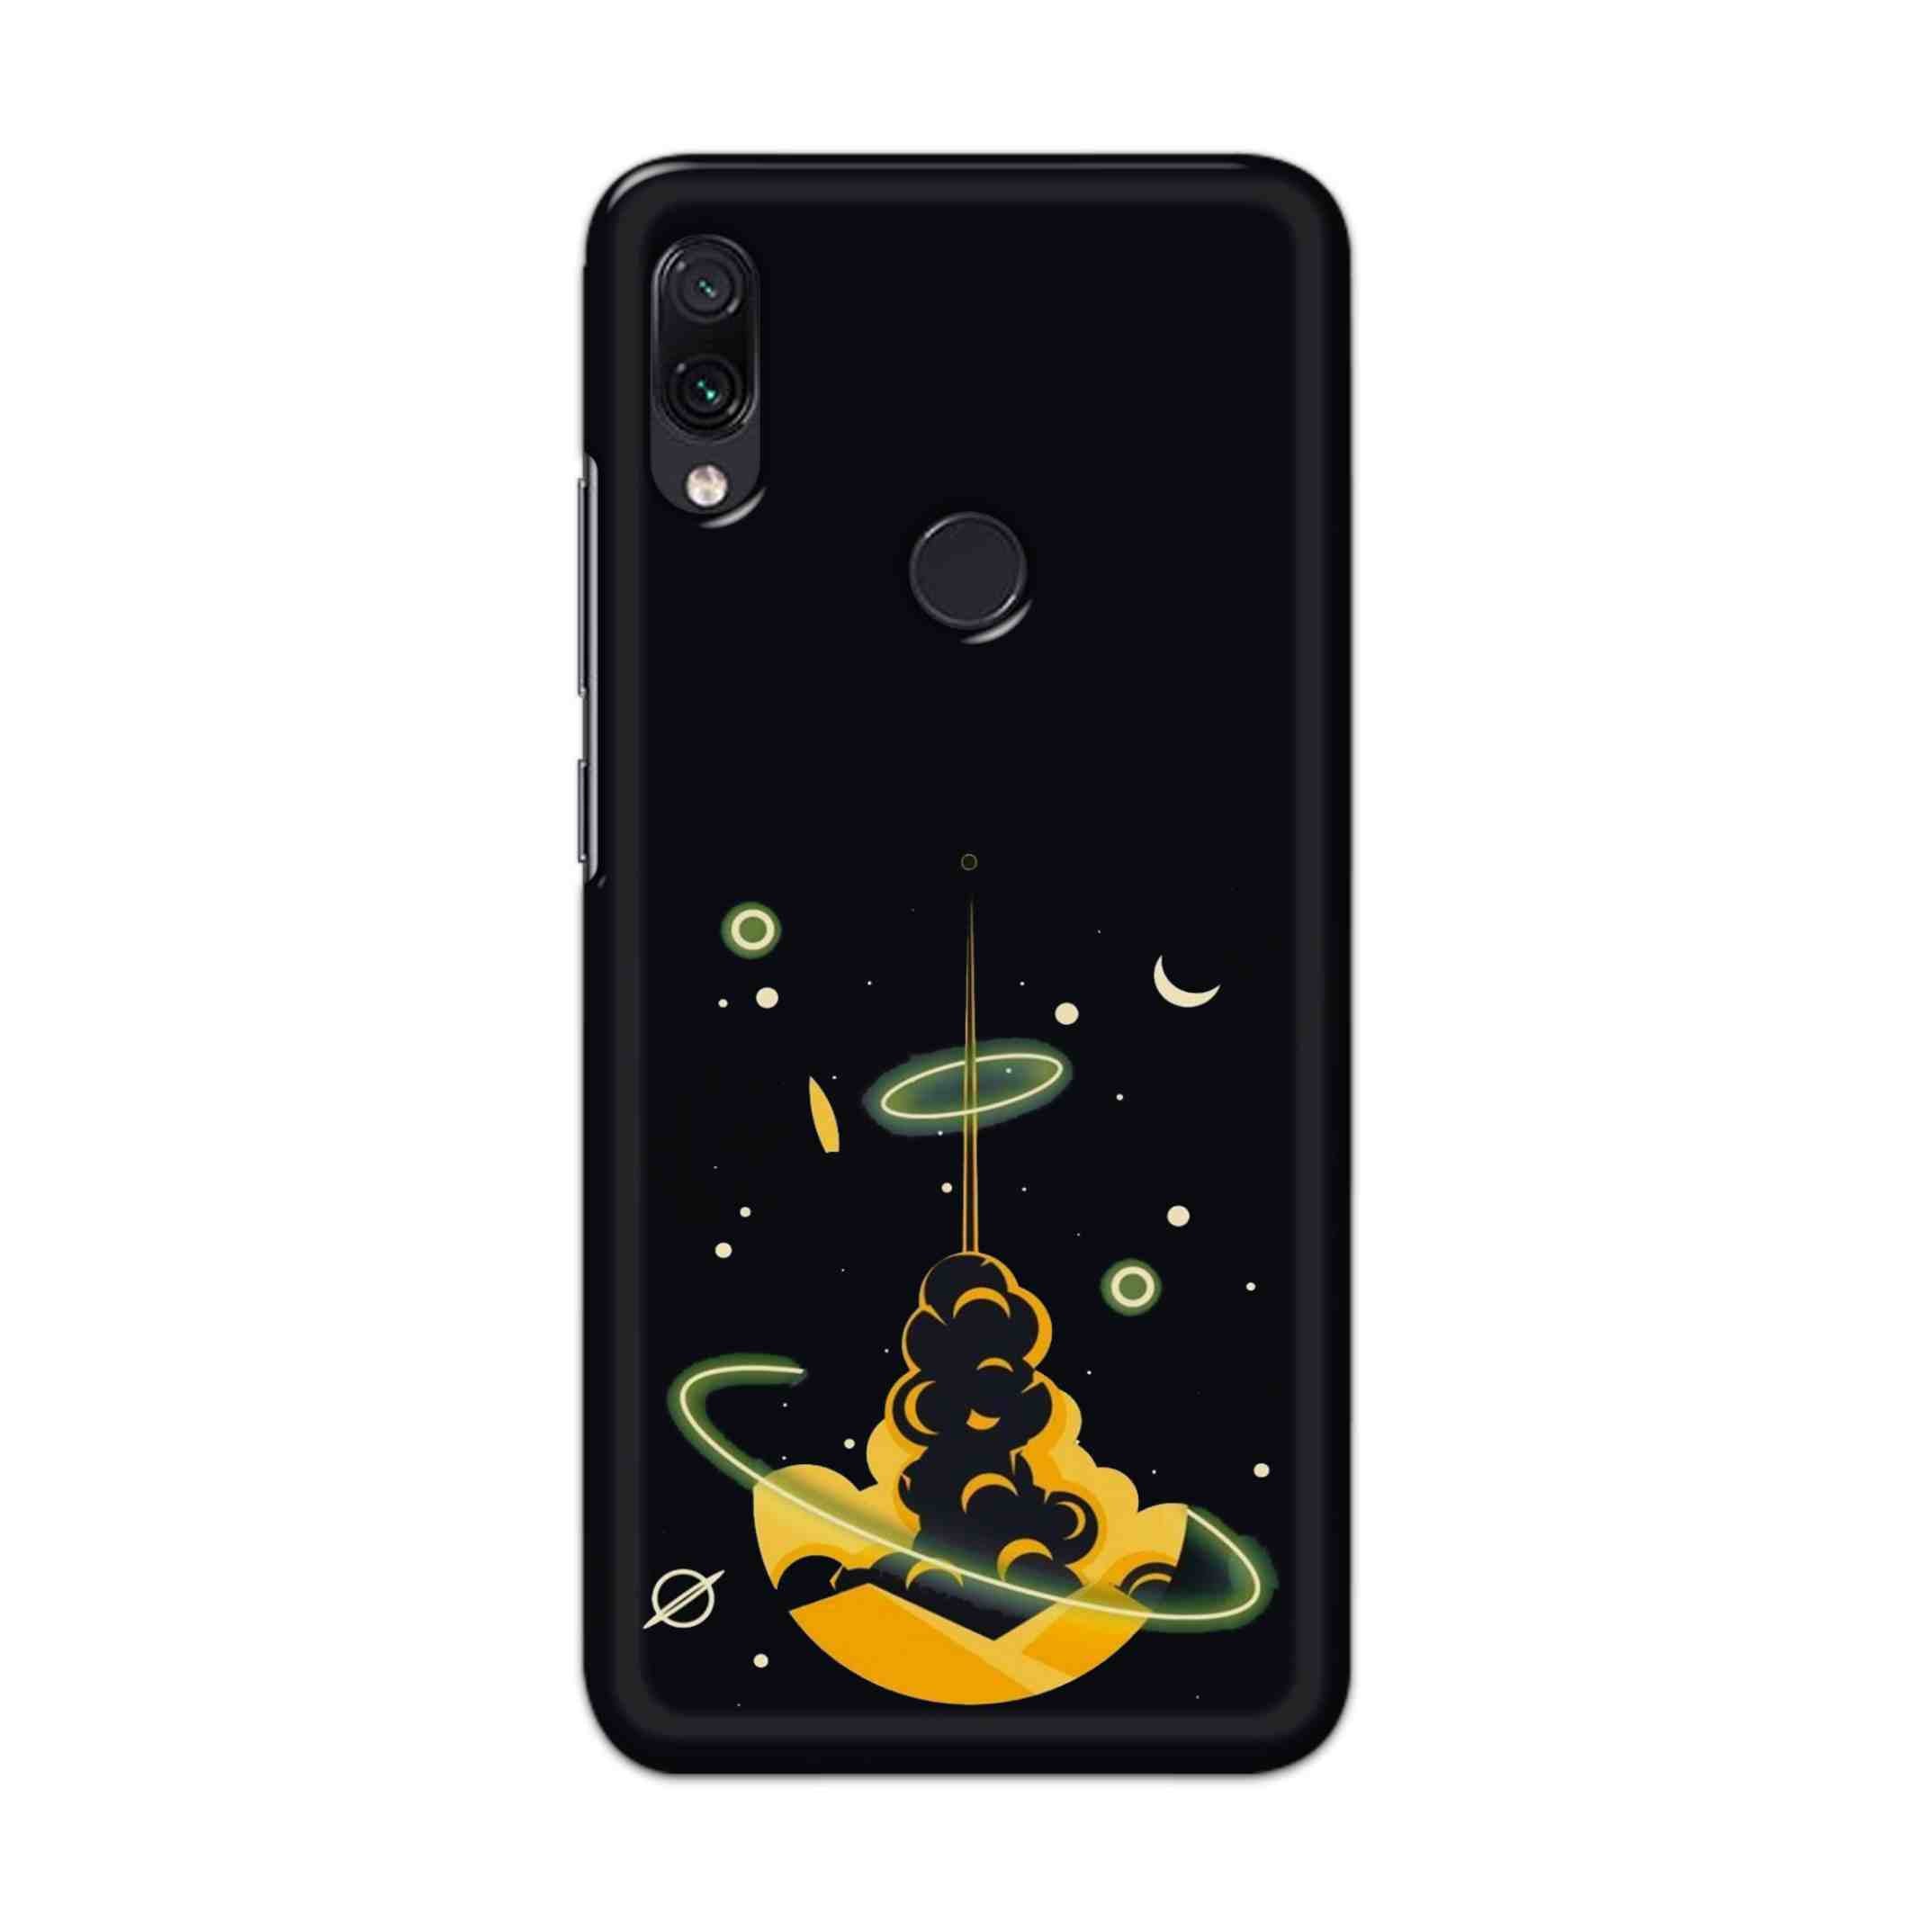 Buy Moon Hard Back Mobile Phone Case Cover For Redmi Note 7 / Note 7 Pro Online